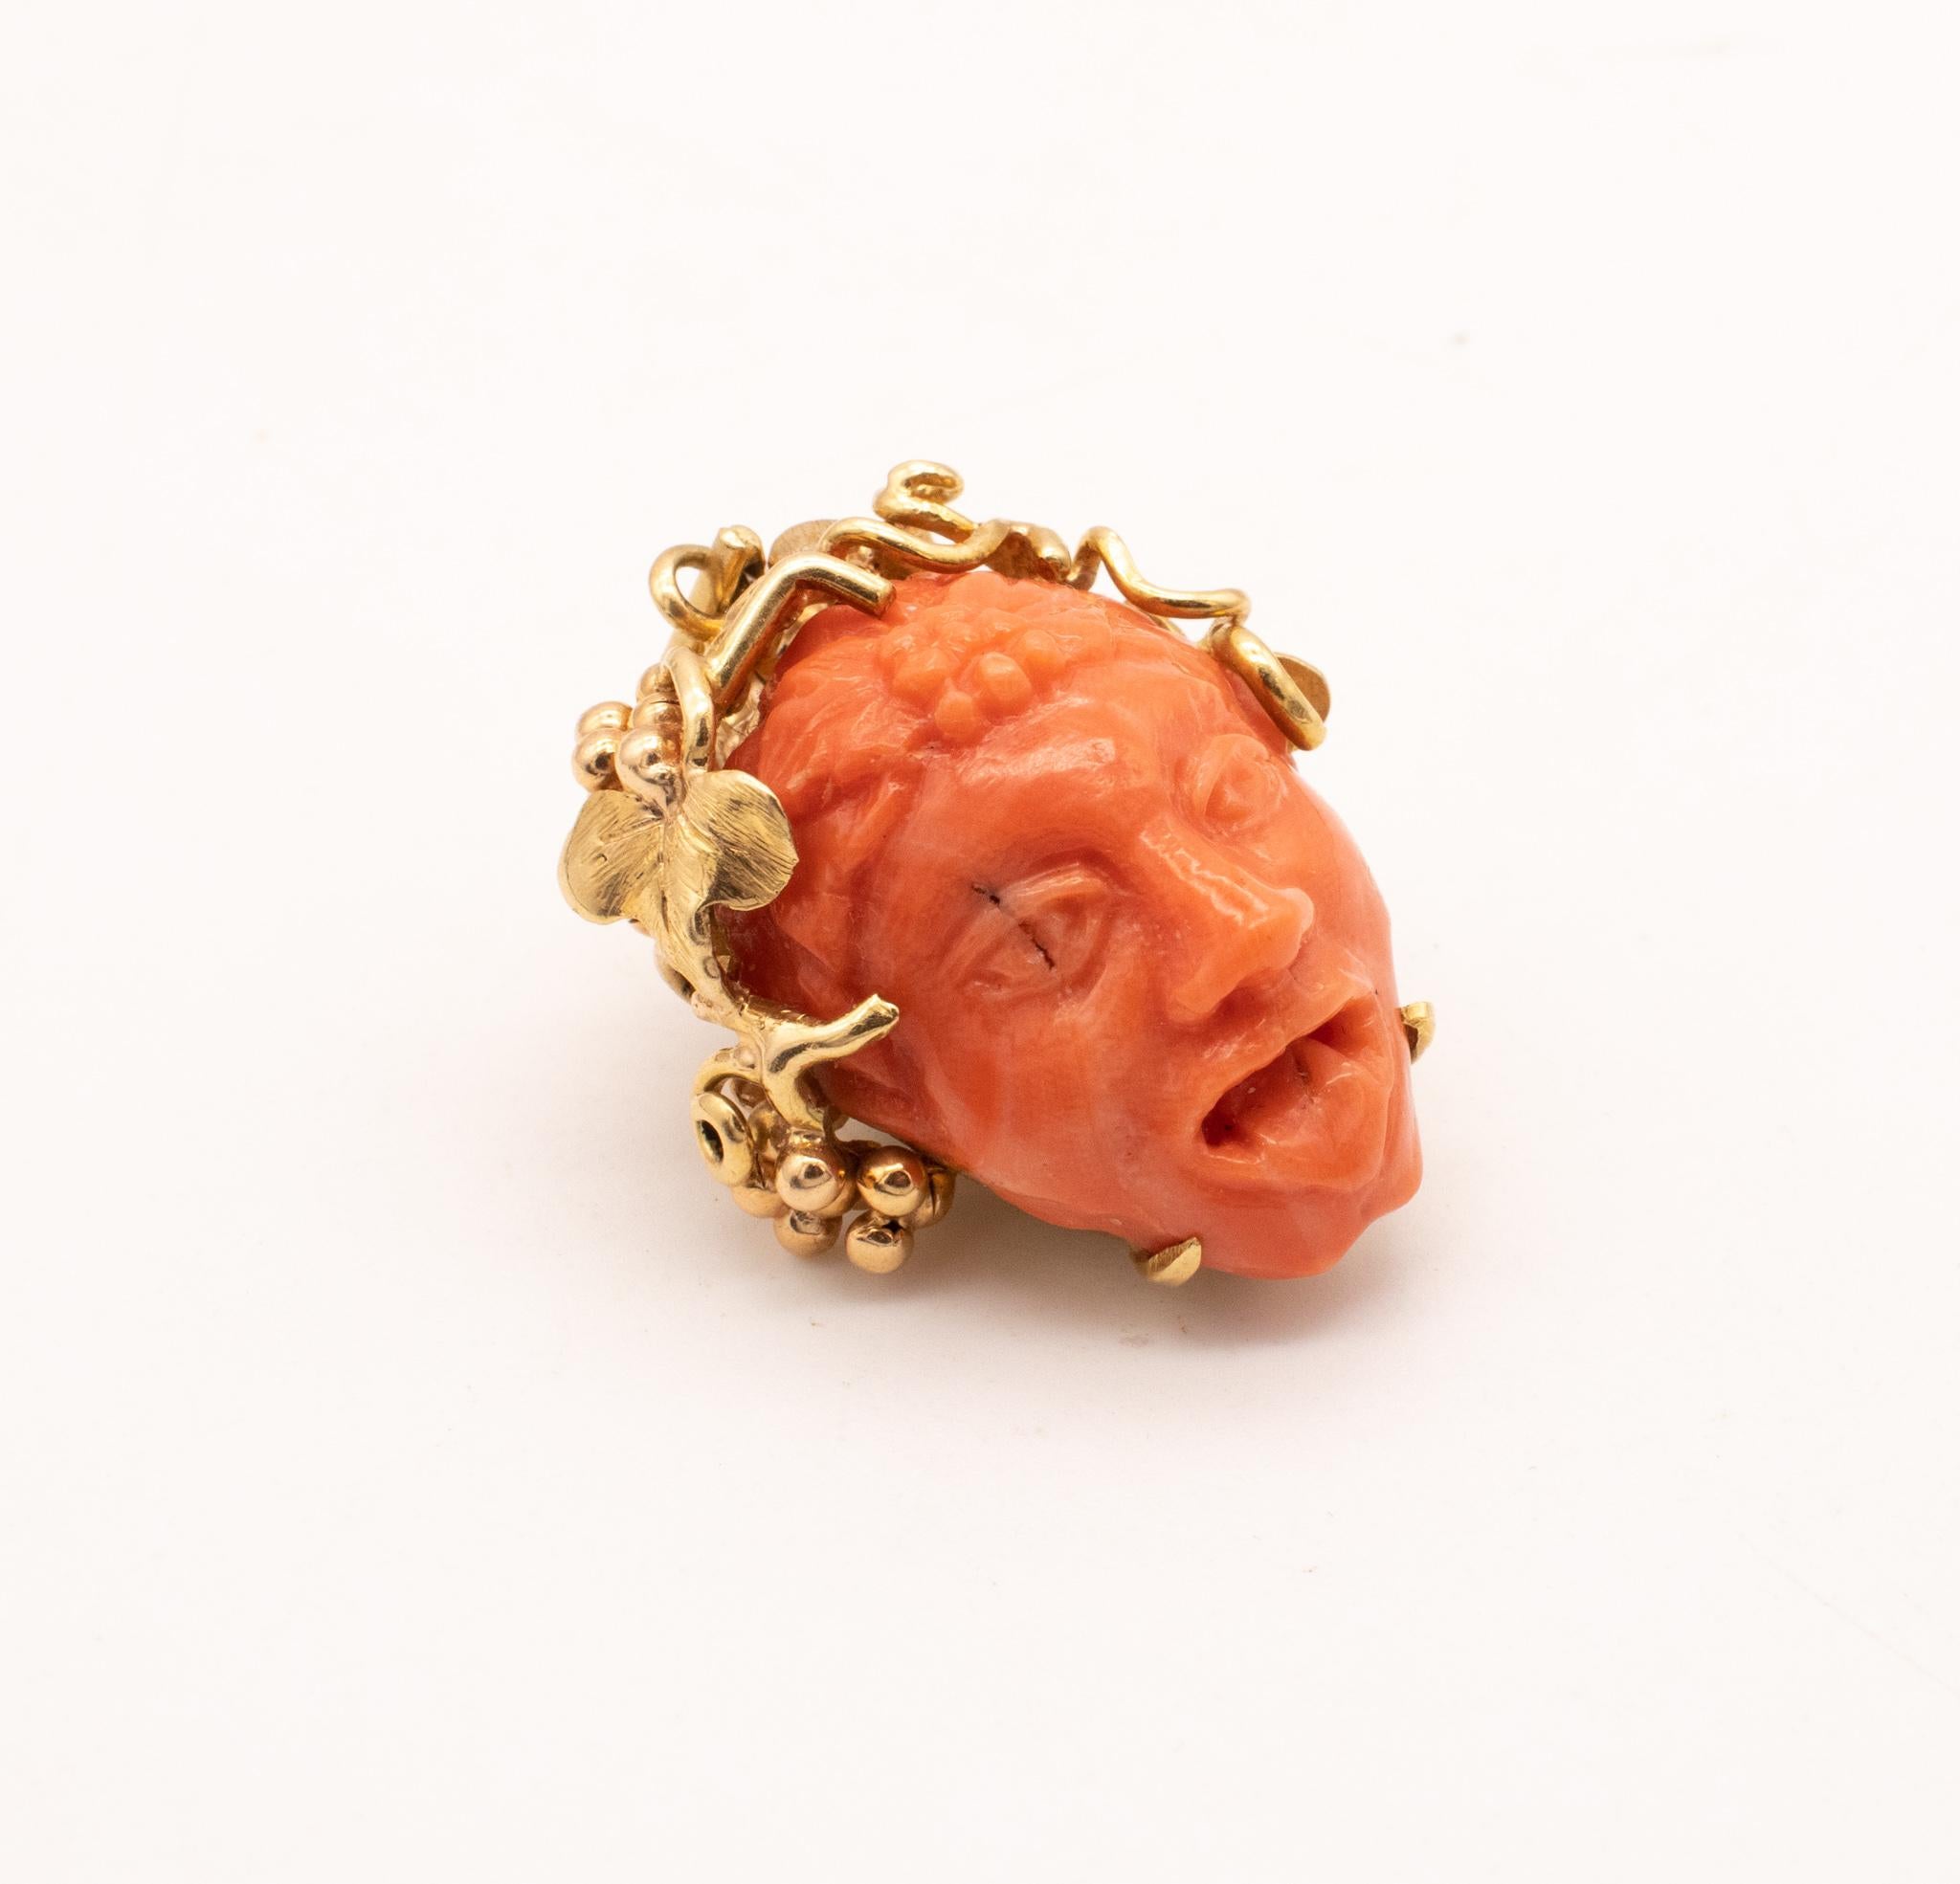 Spritzer and Fuhrmann 18Kt Gold Pendant with Bacchus Head Carved in Coral In Excellent Condition For Sale In Miami, FL